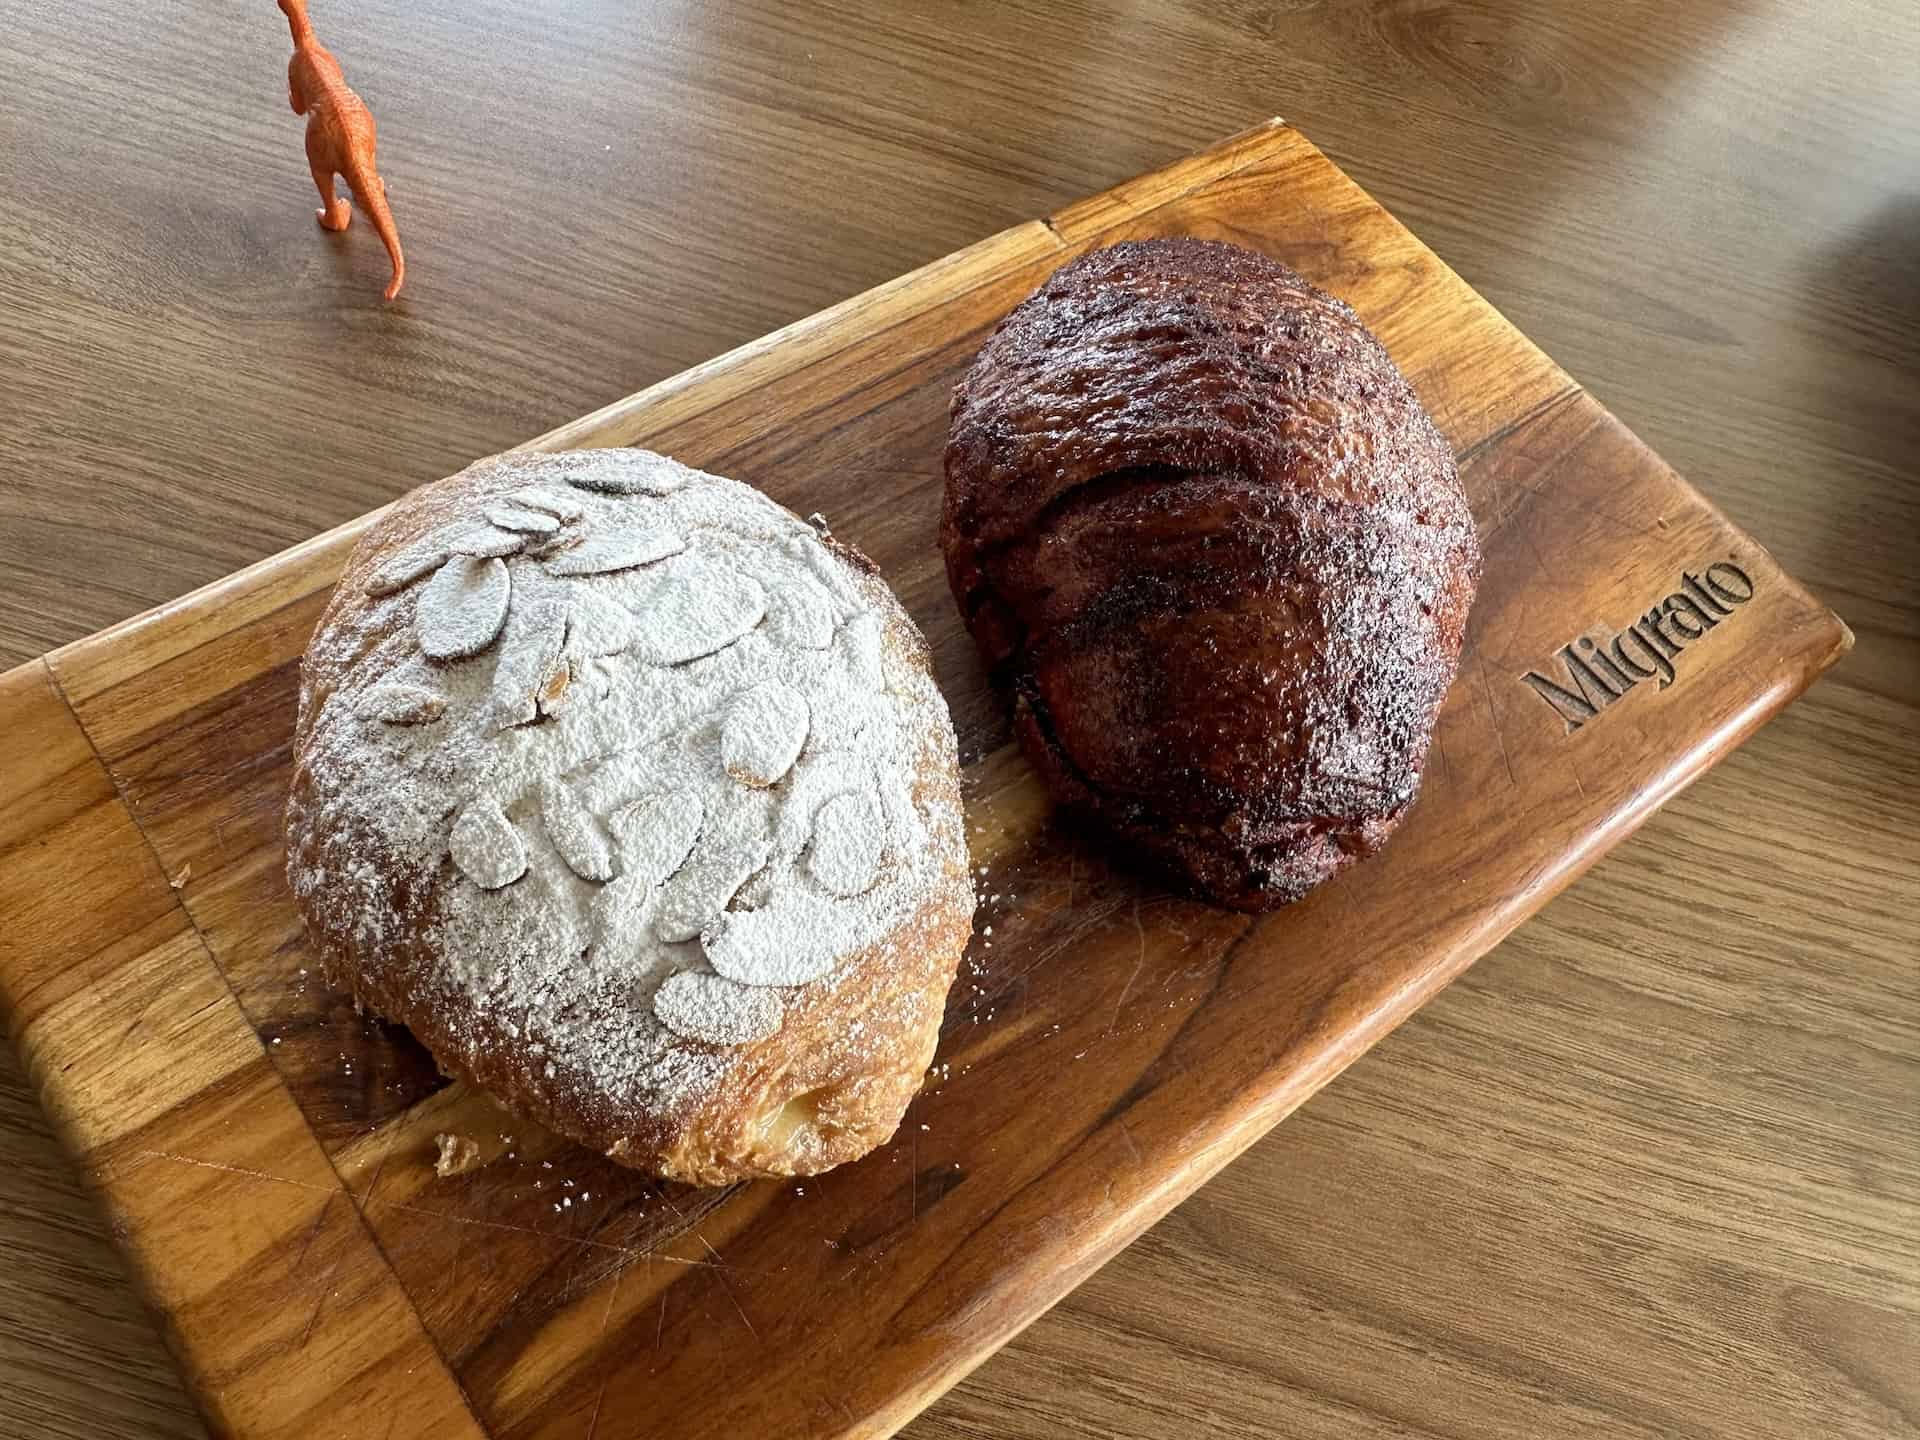 Almond (left) and cranberry (right) croissants at Migrato in Pereira, Colombia